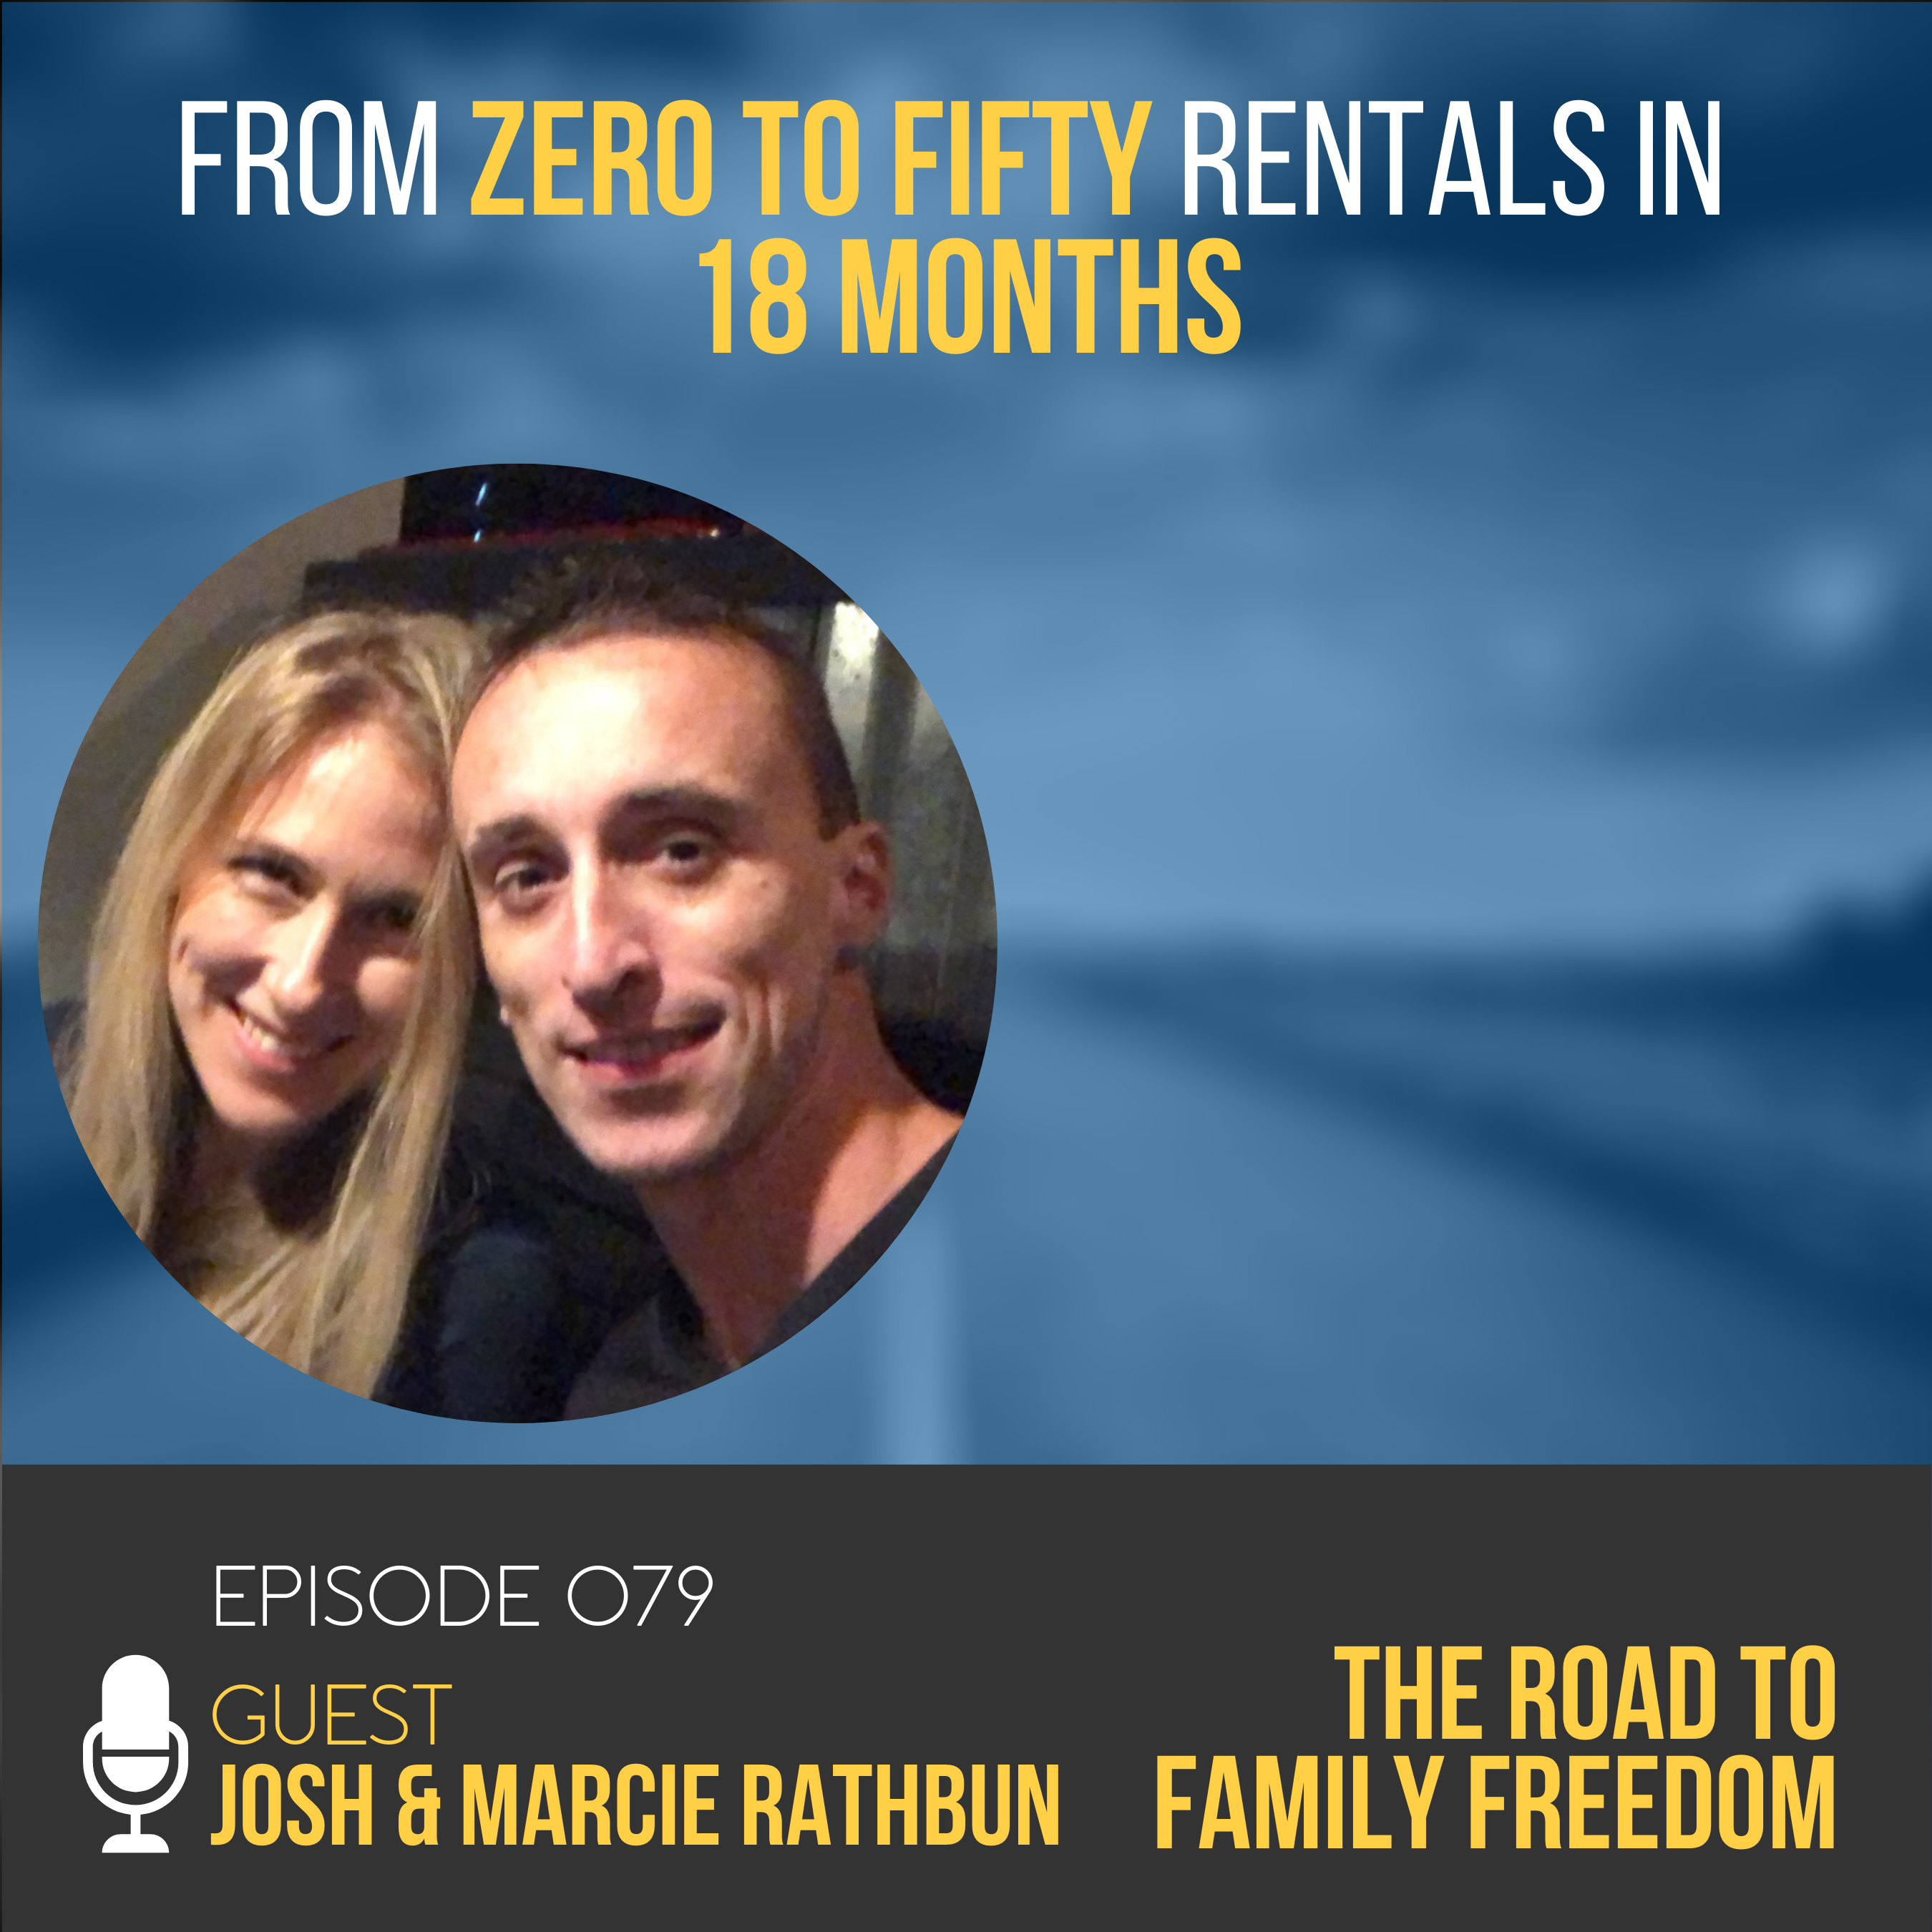 From Zero to Fifty Rentals in 18 Months with Josh and Marcie Rathbun